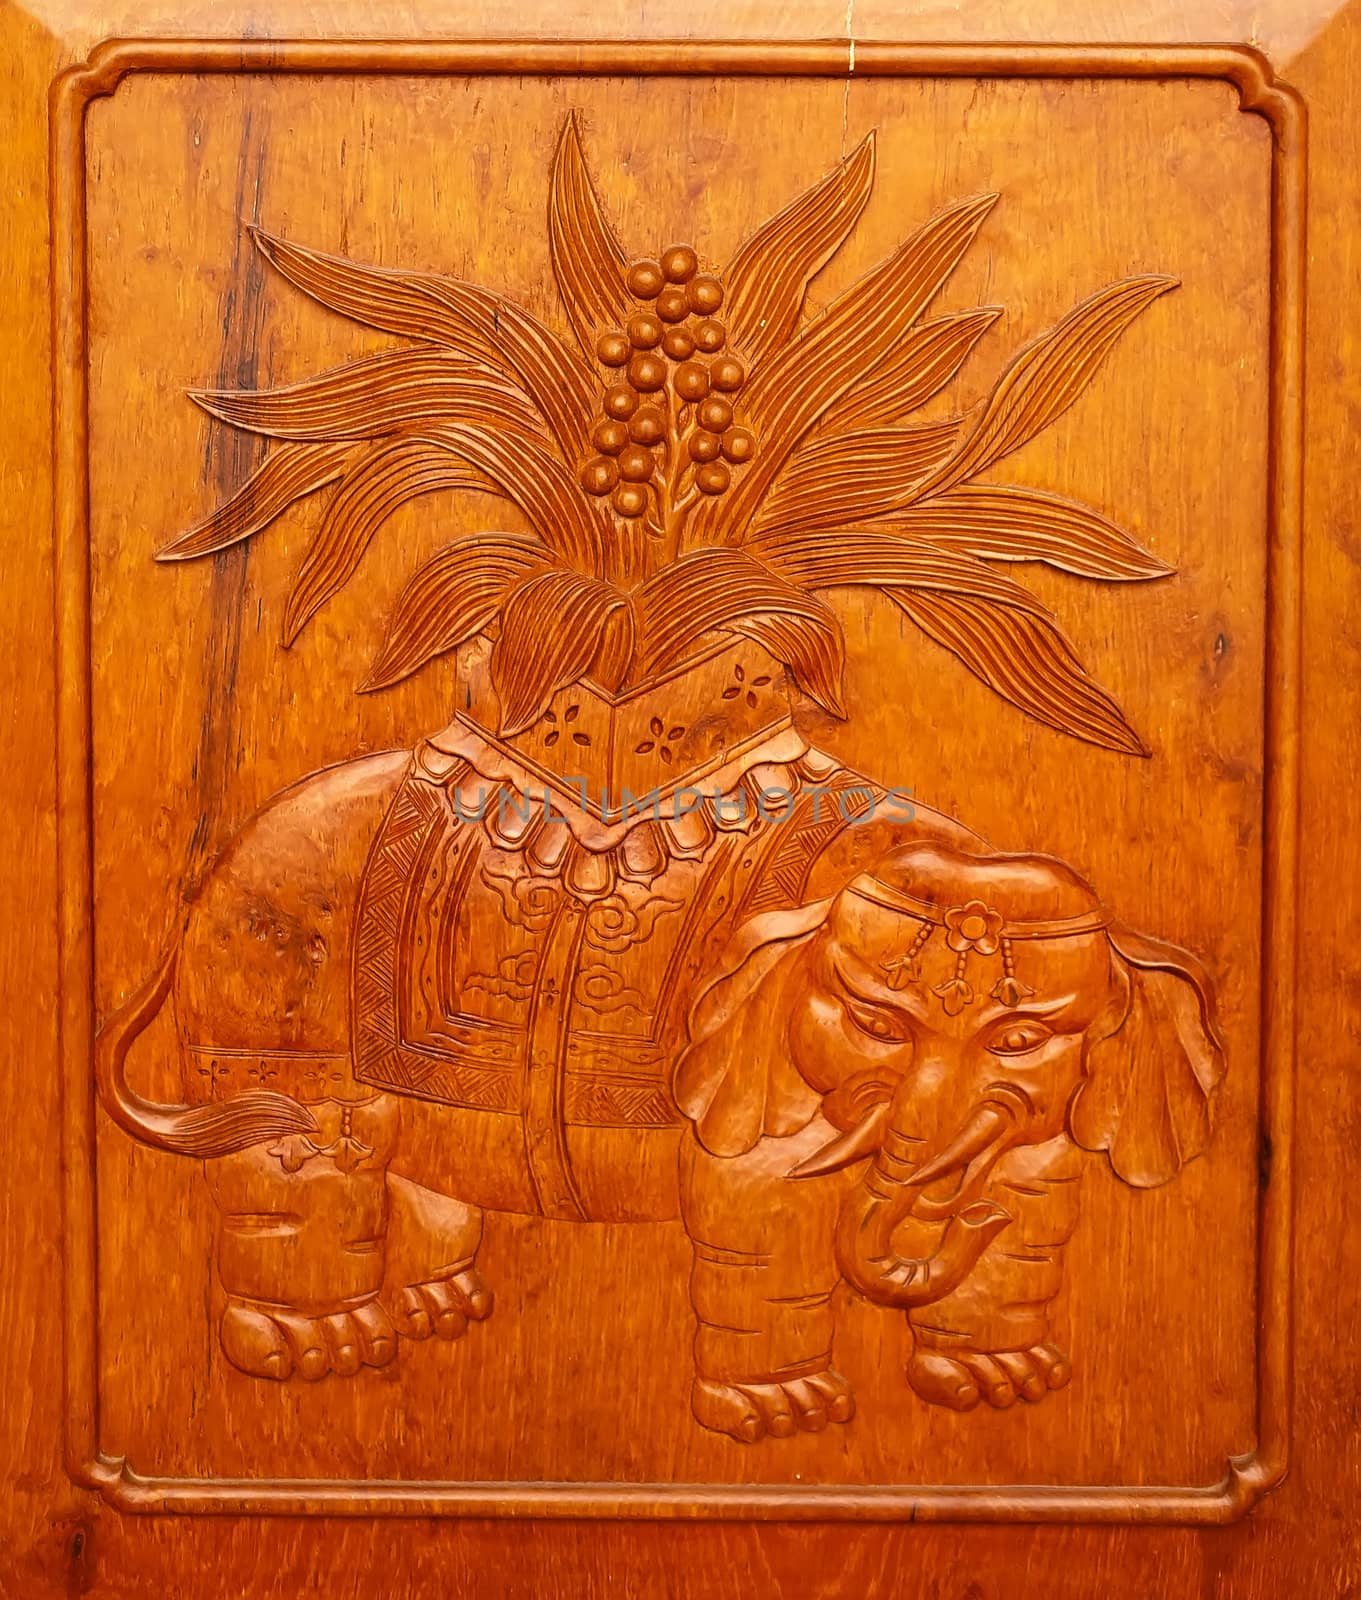 Wooden Elephant Panel Door Jing An Tranquility Temple Shanghai China Richest buddhist temple in Shanghai